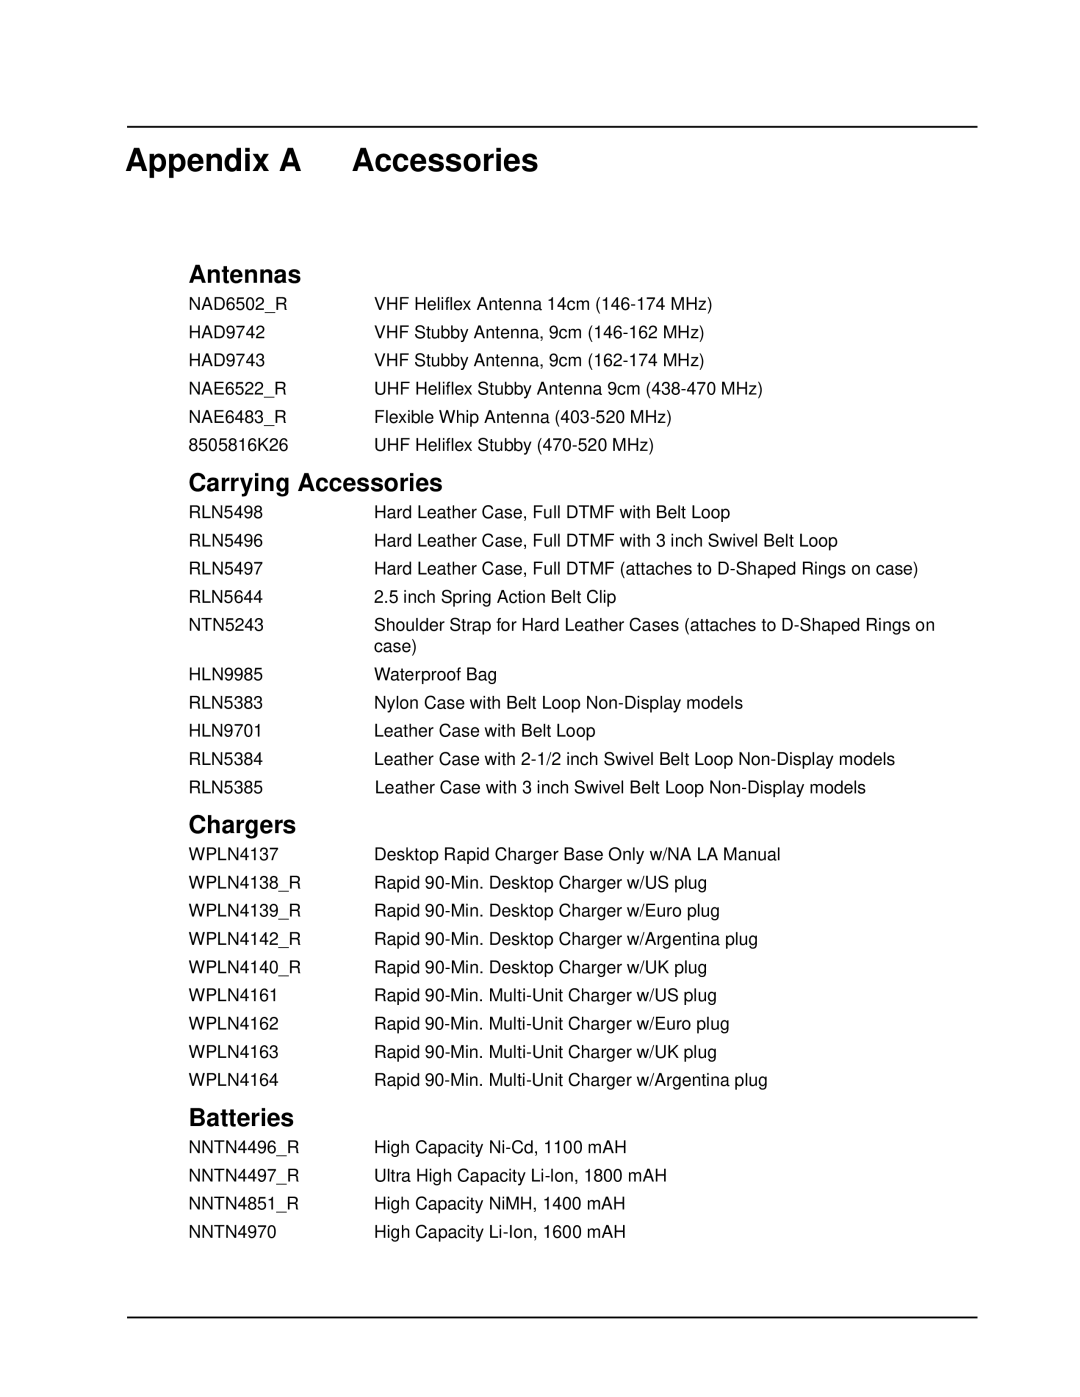 Motorola EP450 service manual Appendix a Accessories, Antennas, Carrying Accessories, Chargers, Batteries 